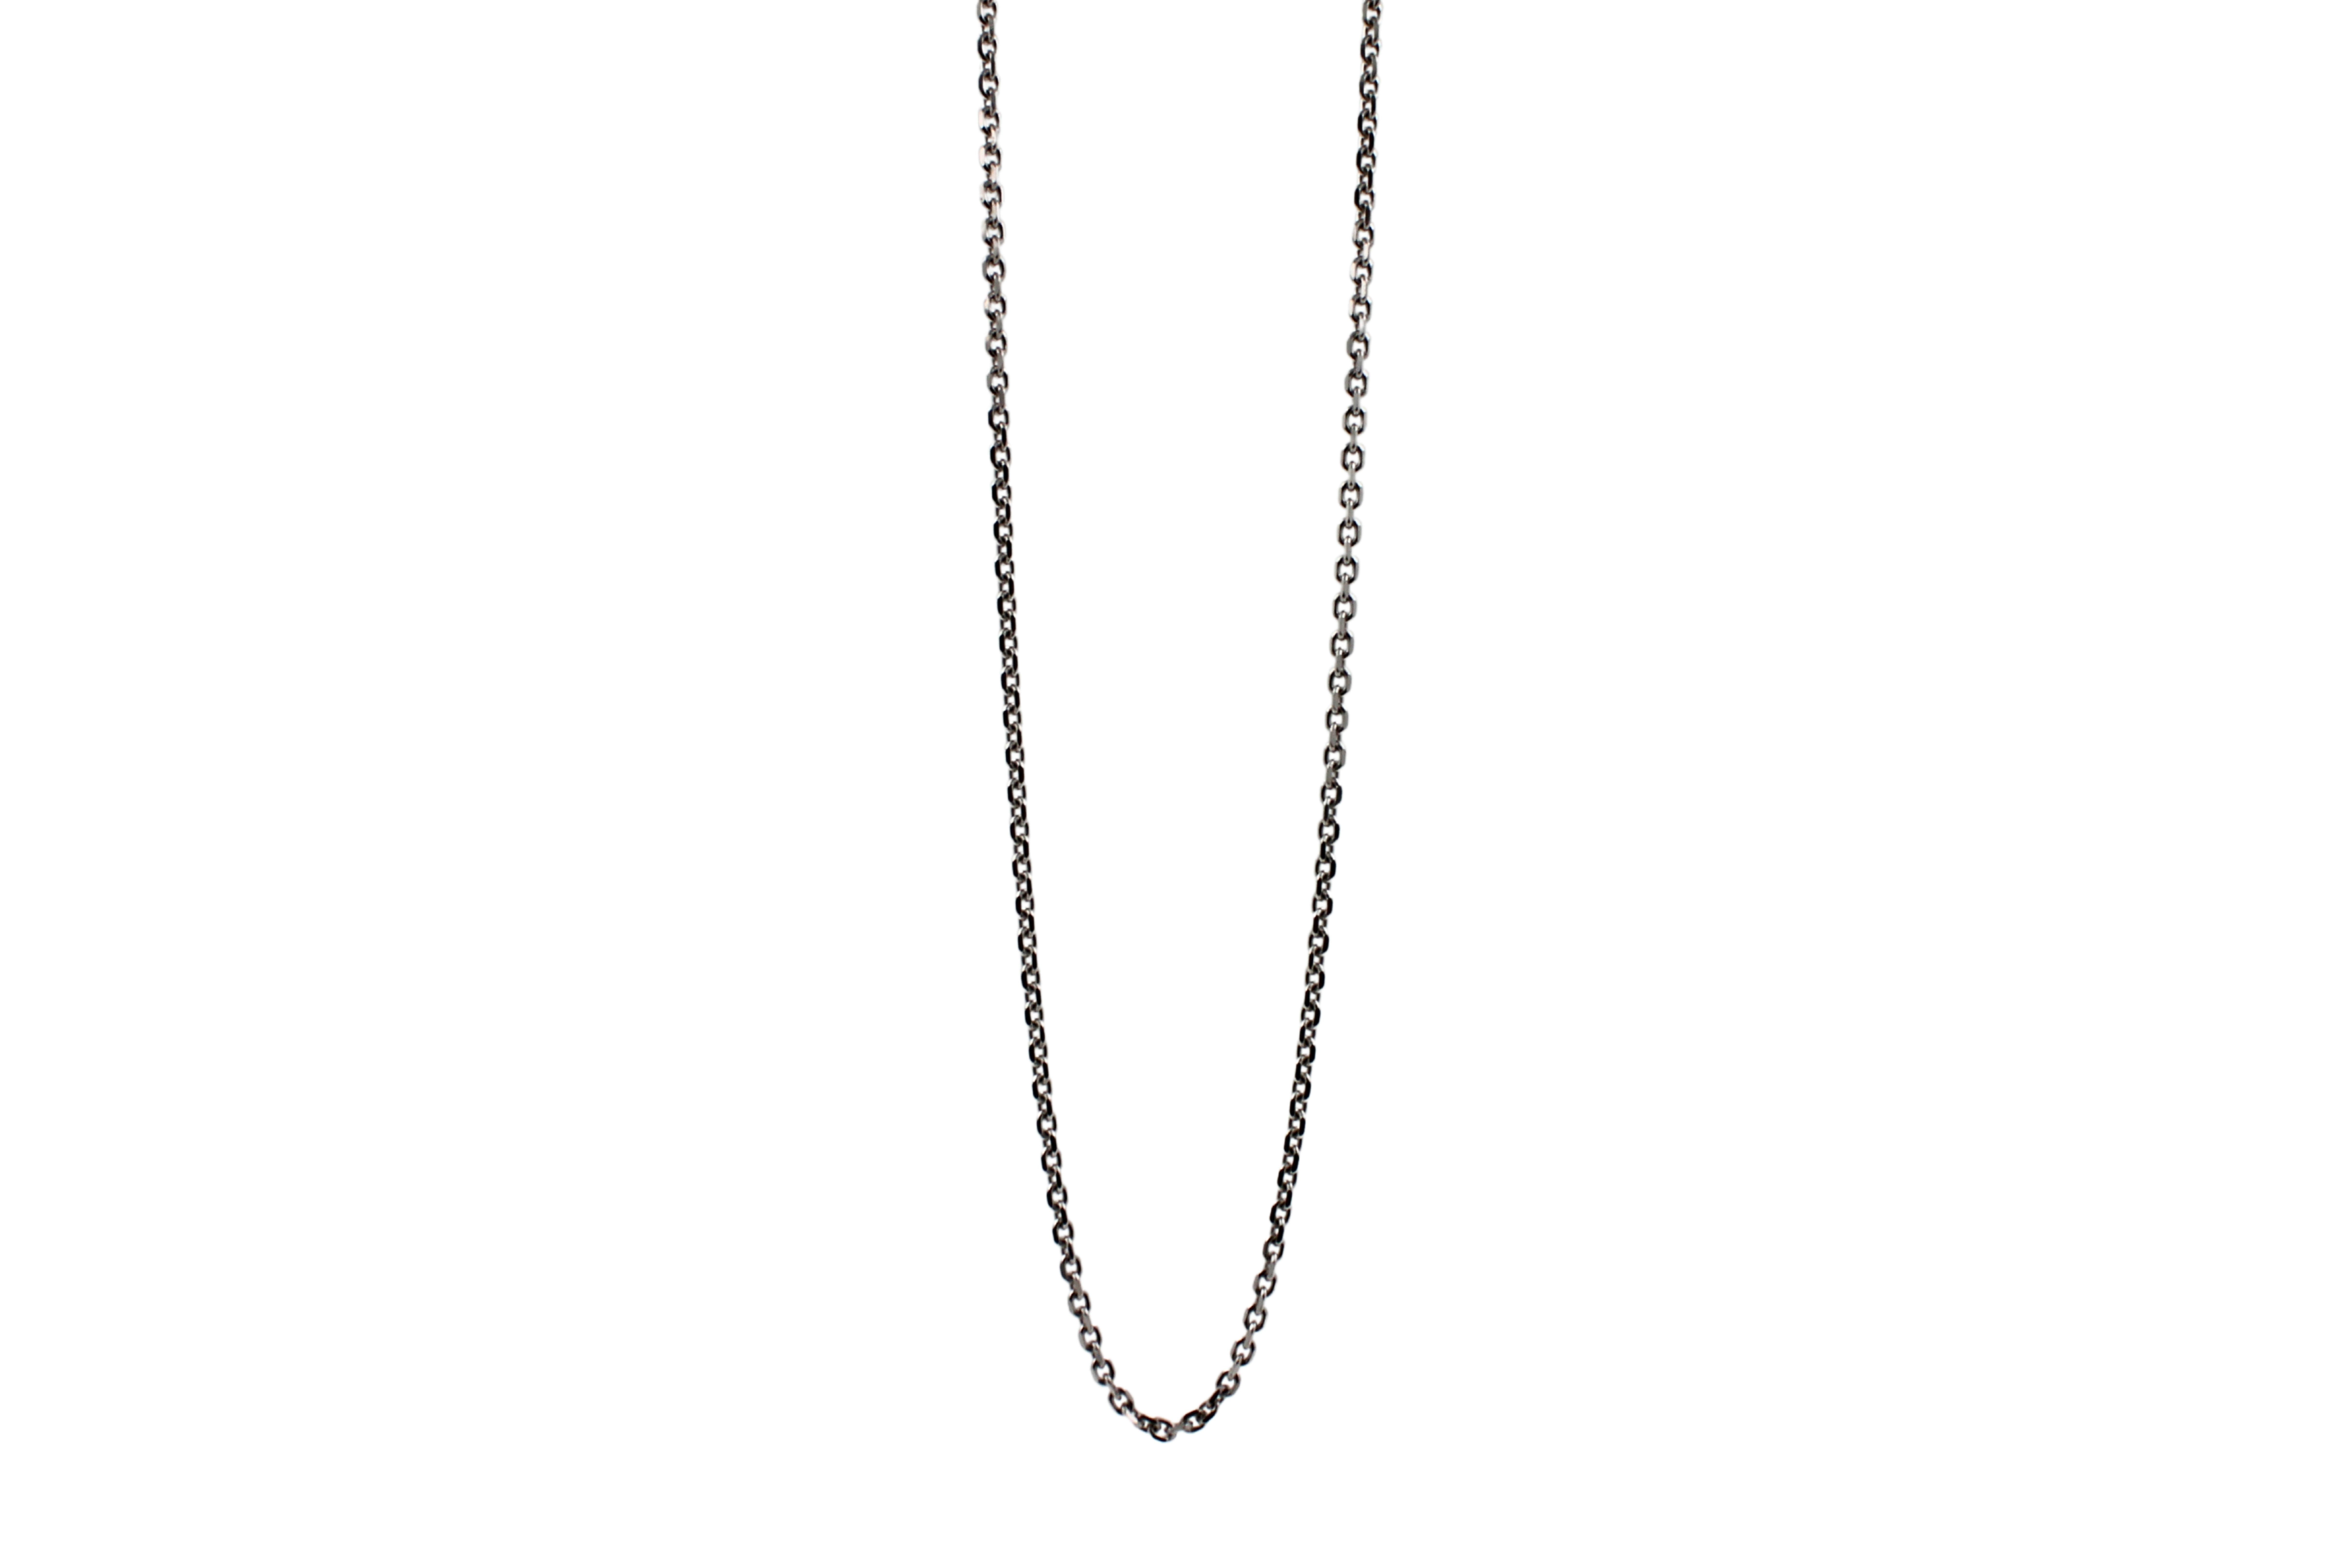 Diamond Cut Cable Fancy Dainty Link 925 Sterling Silver Chain Necklace
•	20 inches
•	5.35 grams
•	2mm width
•       Solid Sterling Silver 925
•	White Rhodium Plate Finish


